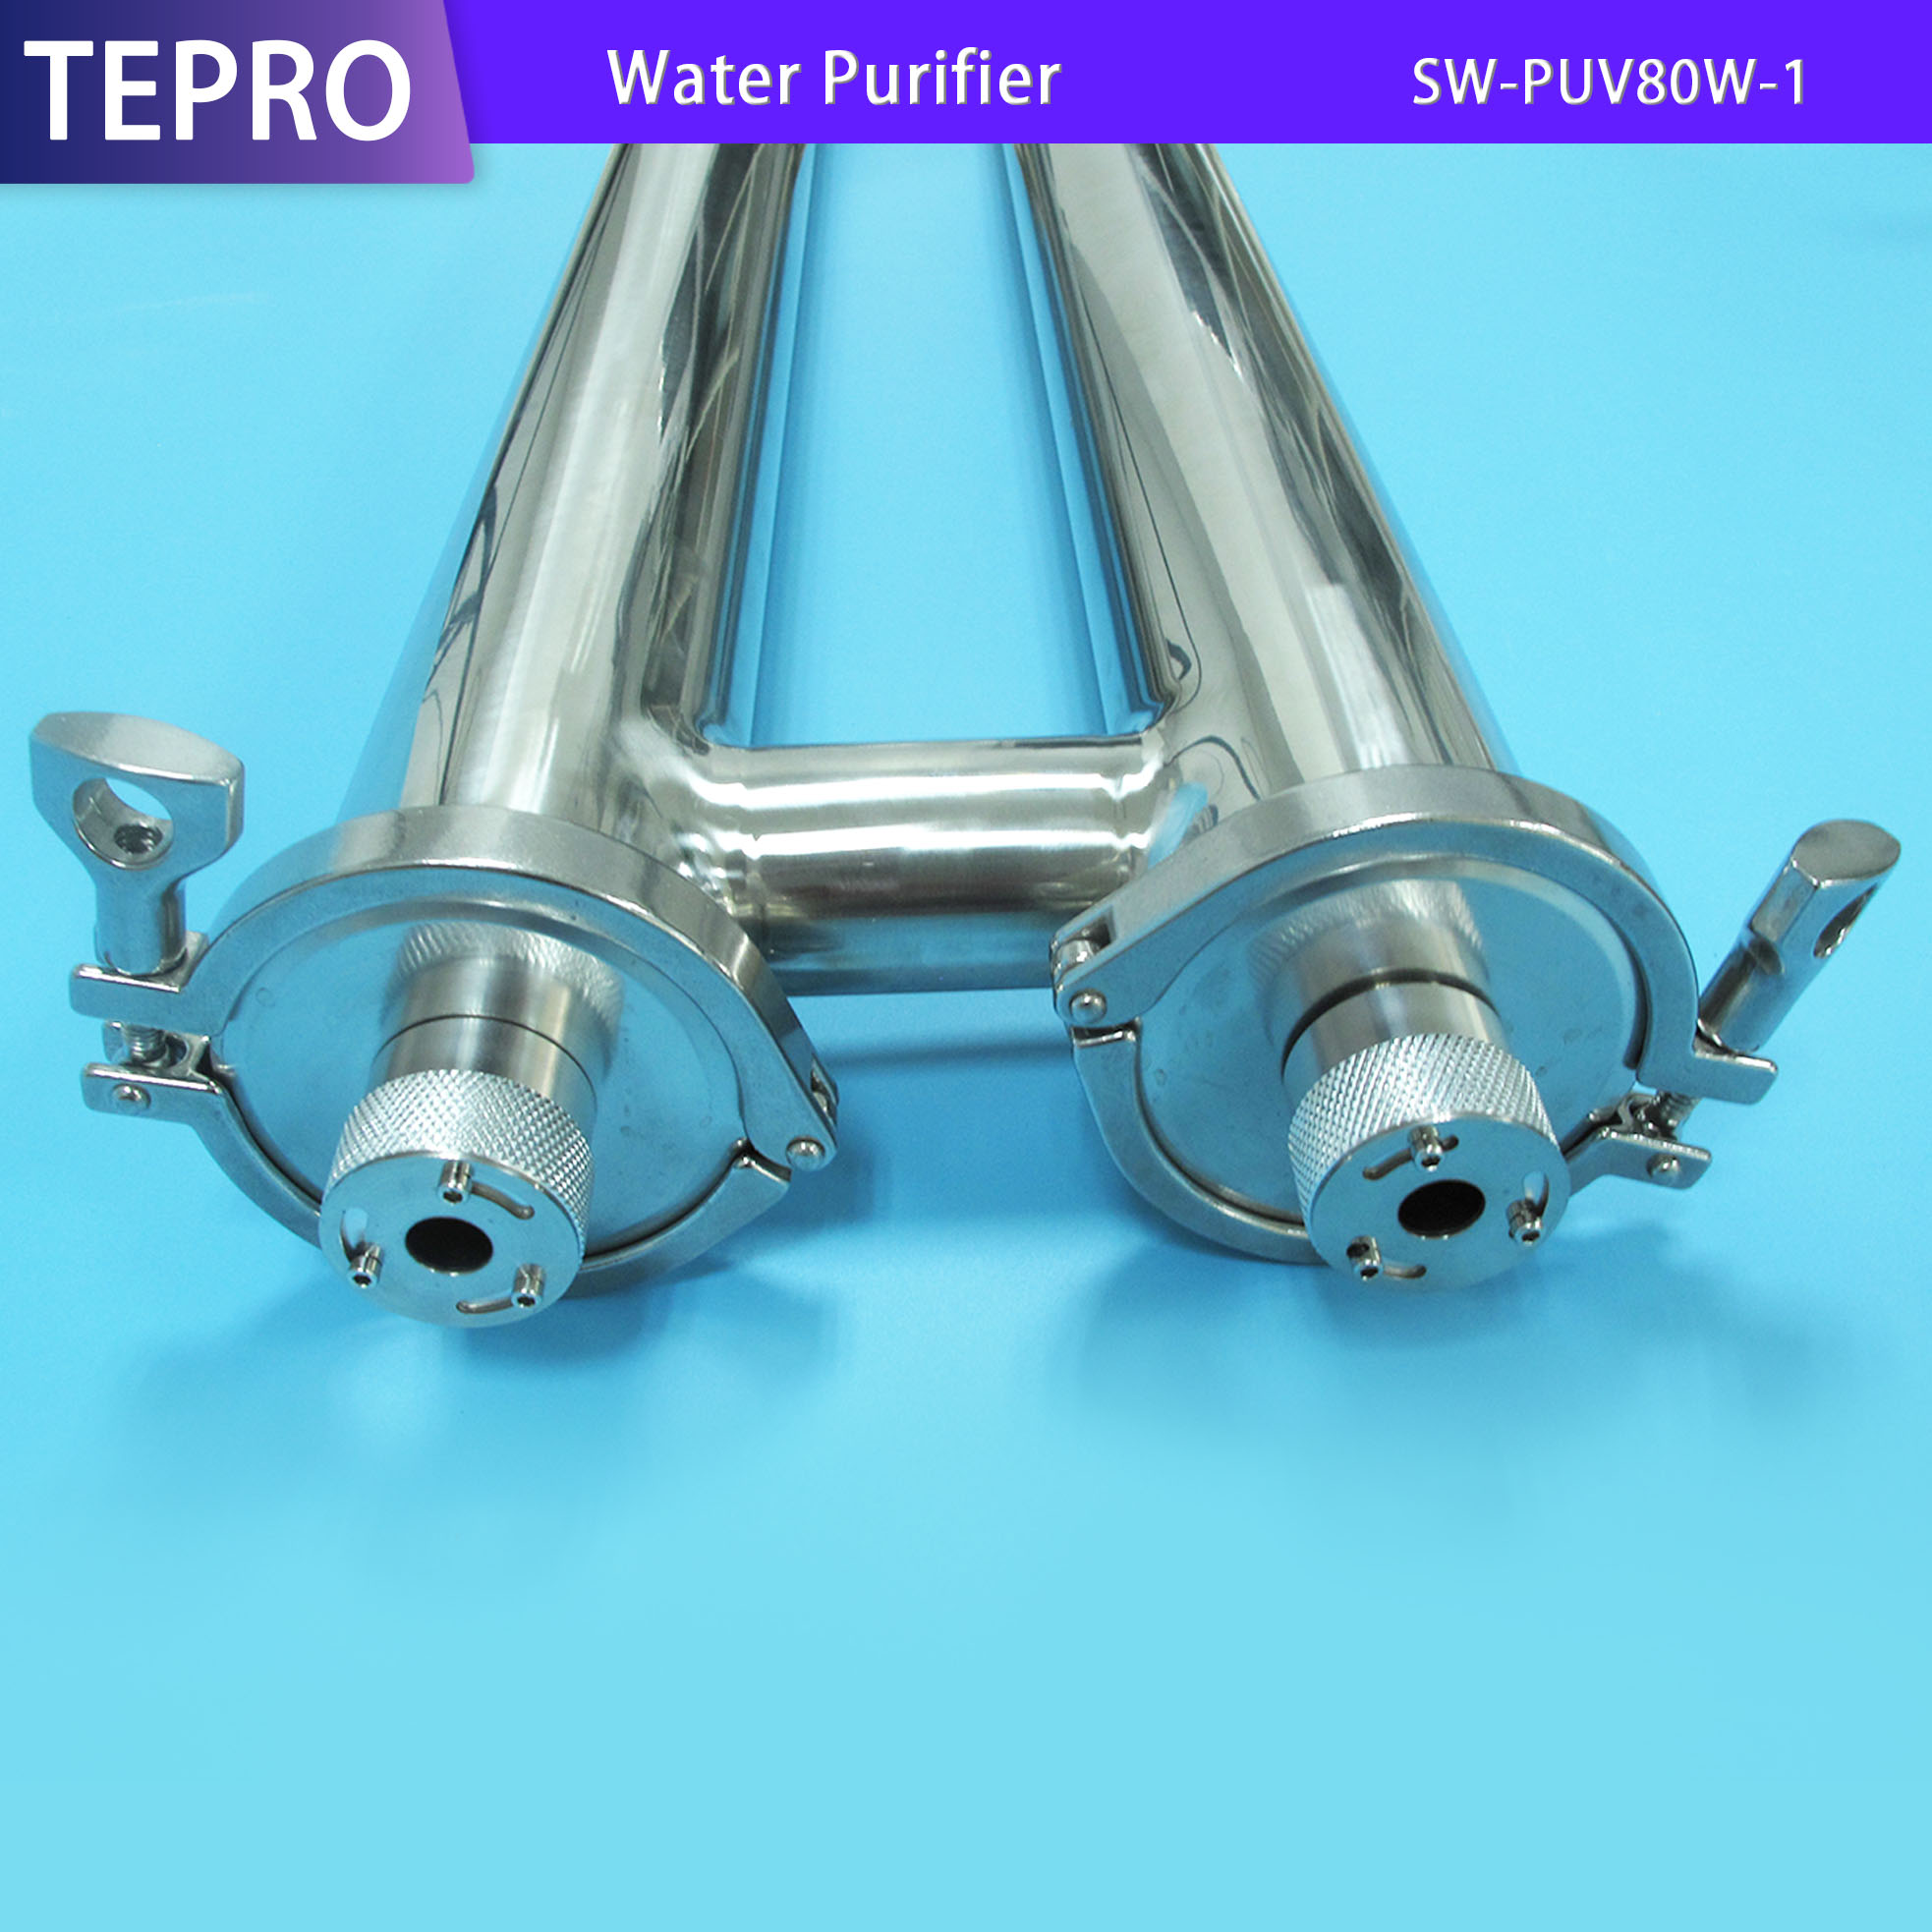 news-Tepro-Tepro ultraviolet water purification system for pools-img